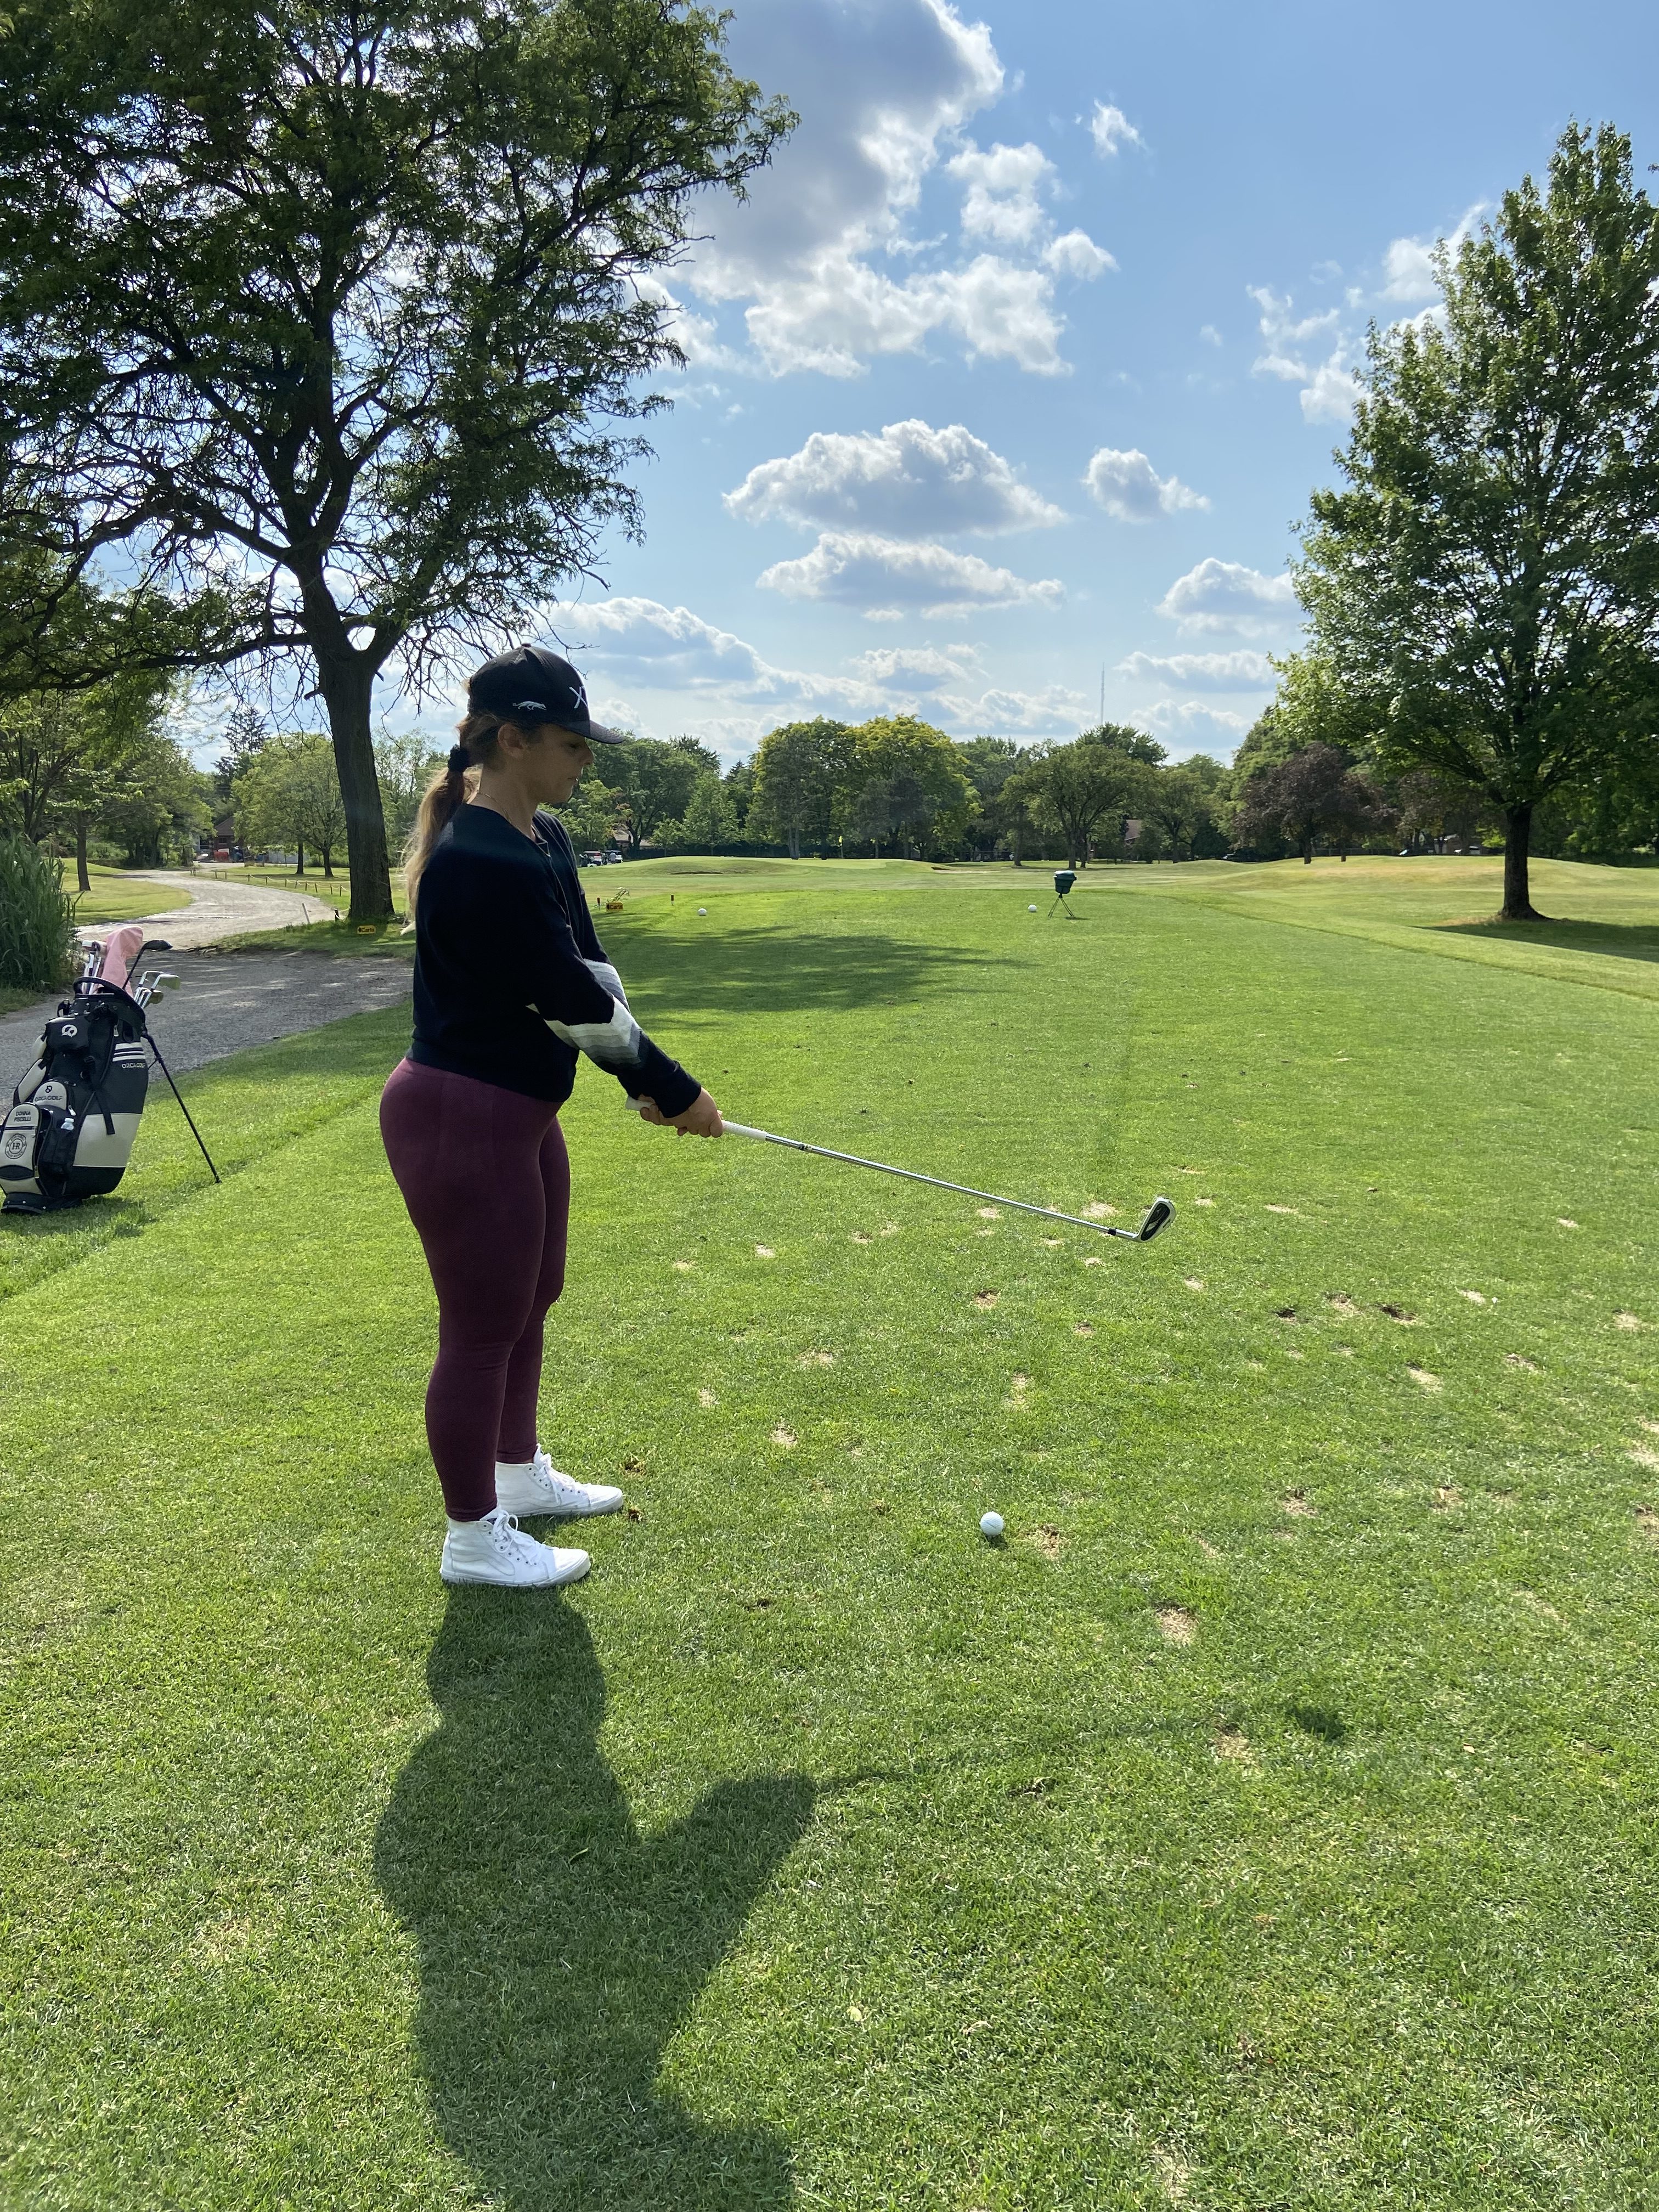 Women's golf tips: Why posture is the key to a successful golf swing